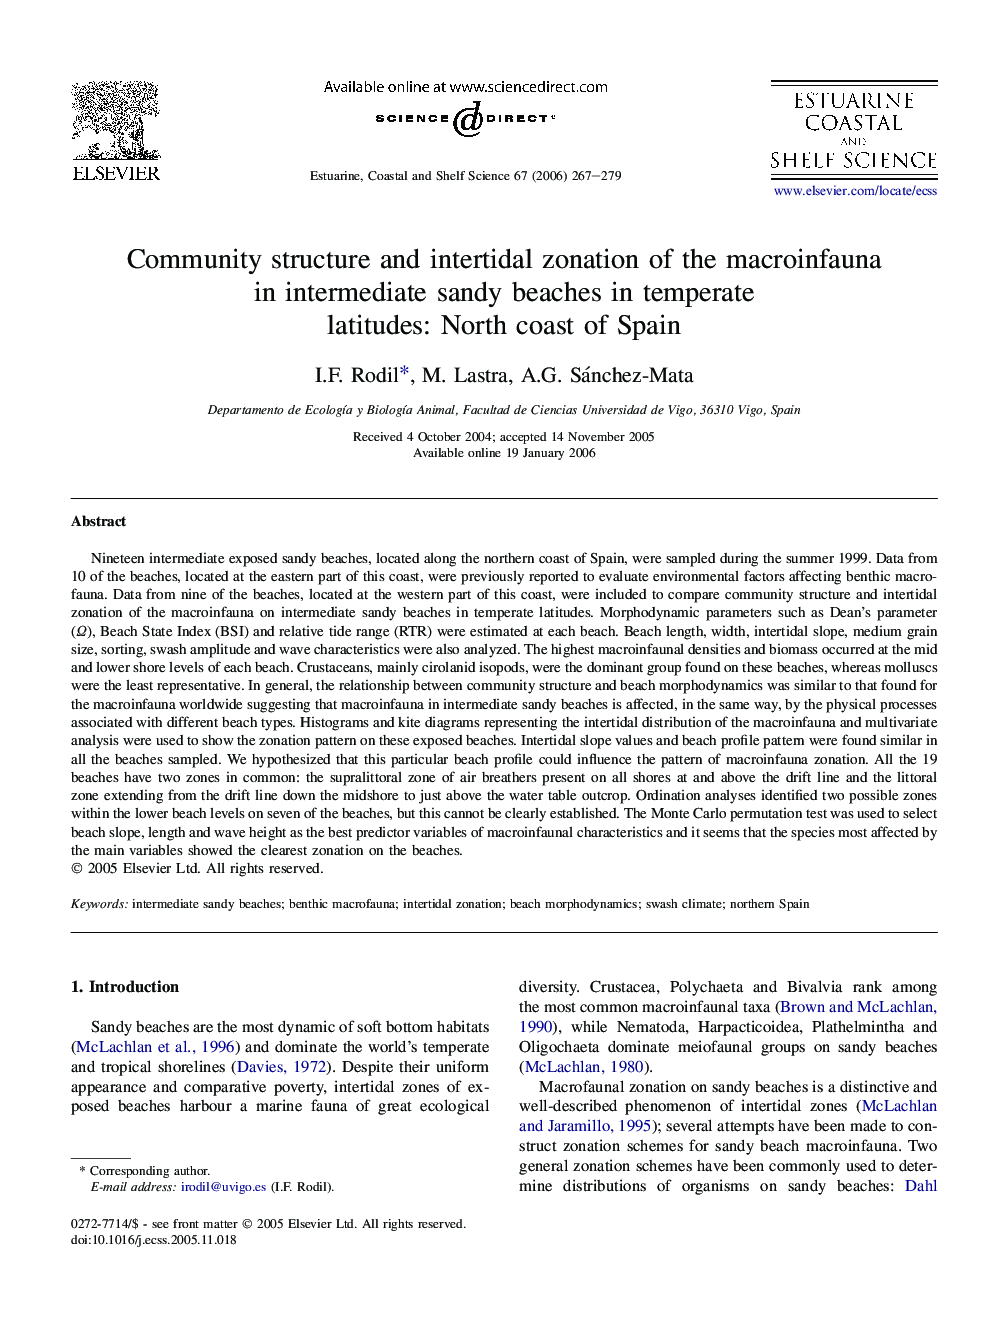 Community structure and intertidal zonation of the macroinfauna in intermediate sandy beaches in temperate latitudes: North coast of Spain